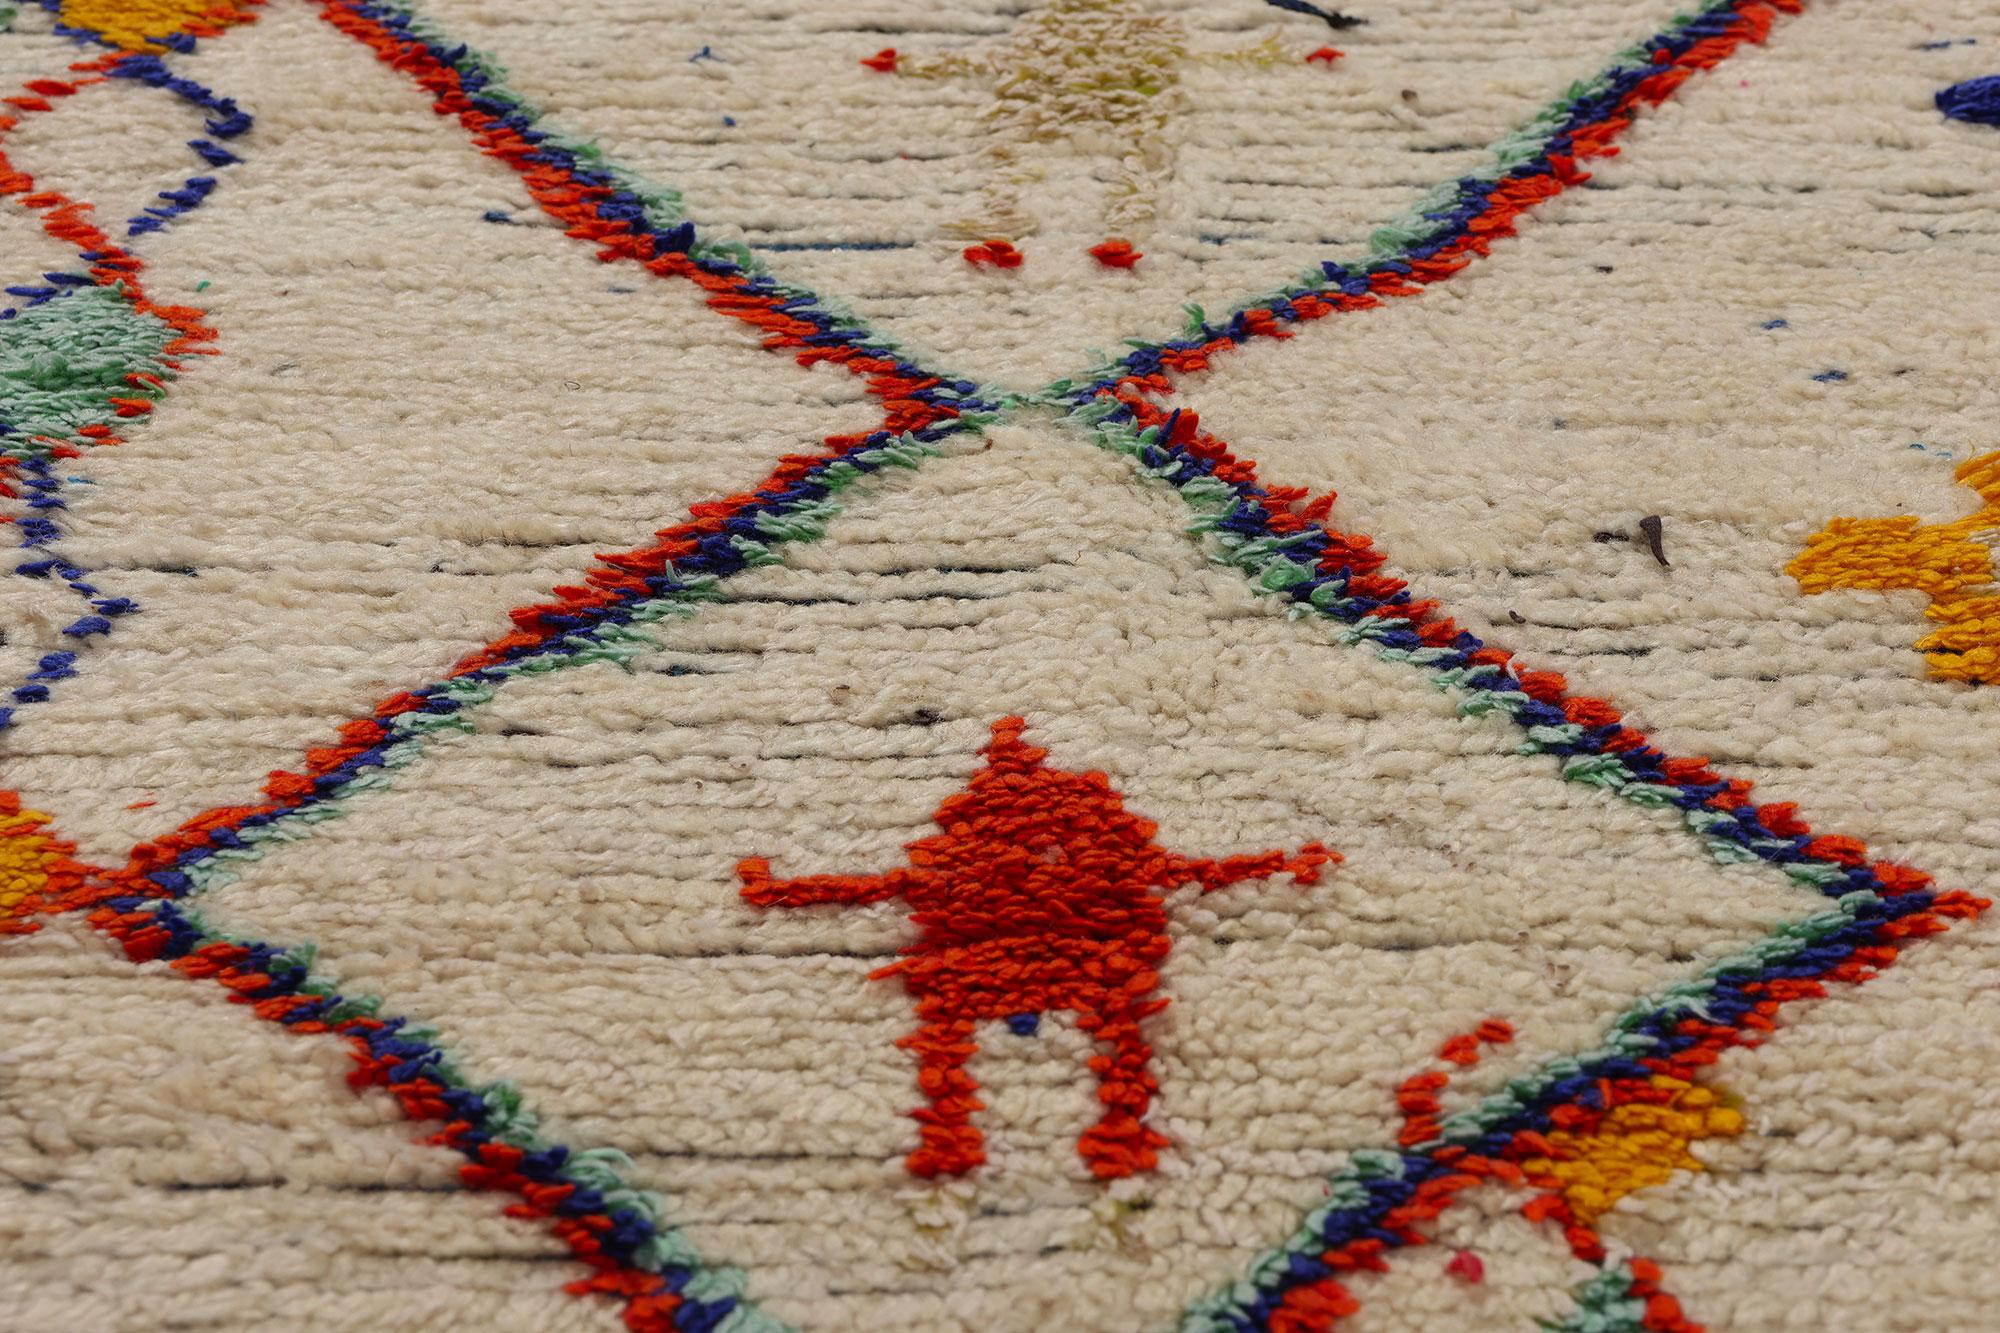 Vintage Berber Moroccan Azilal Rug, Cozy Boho Chic Meets Tribal Enchantment In Good Condition For Sale In Dallas, TX